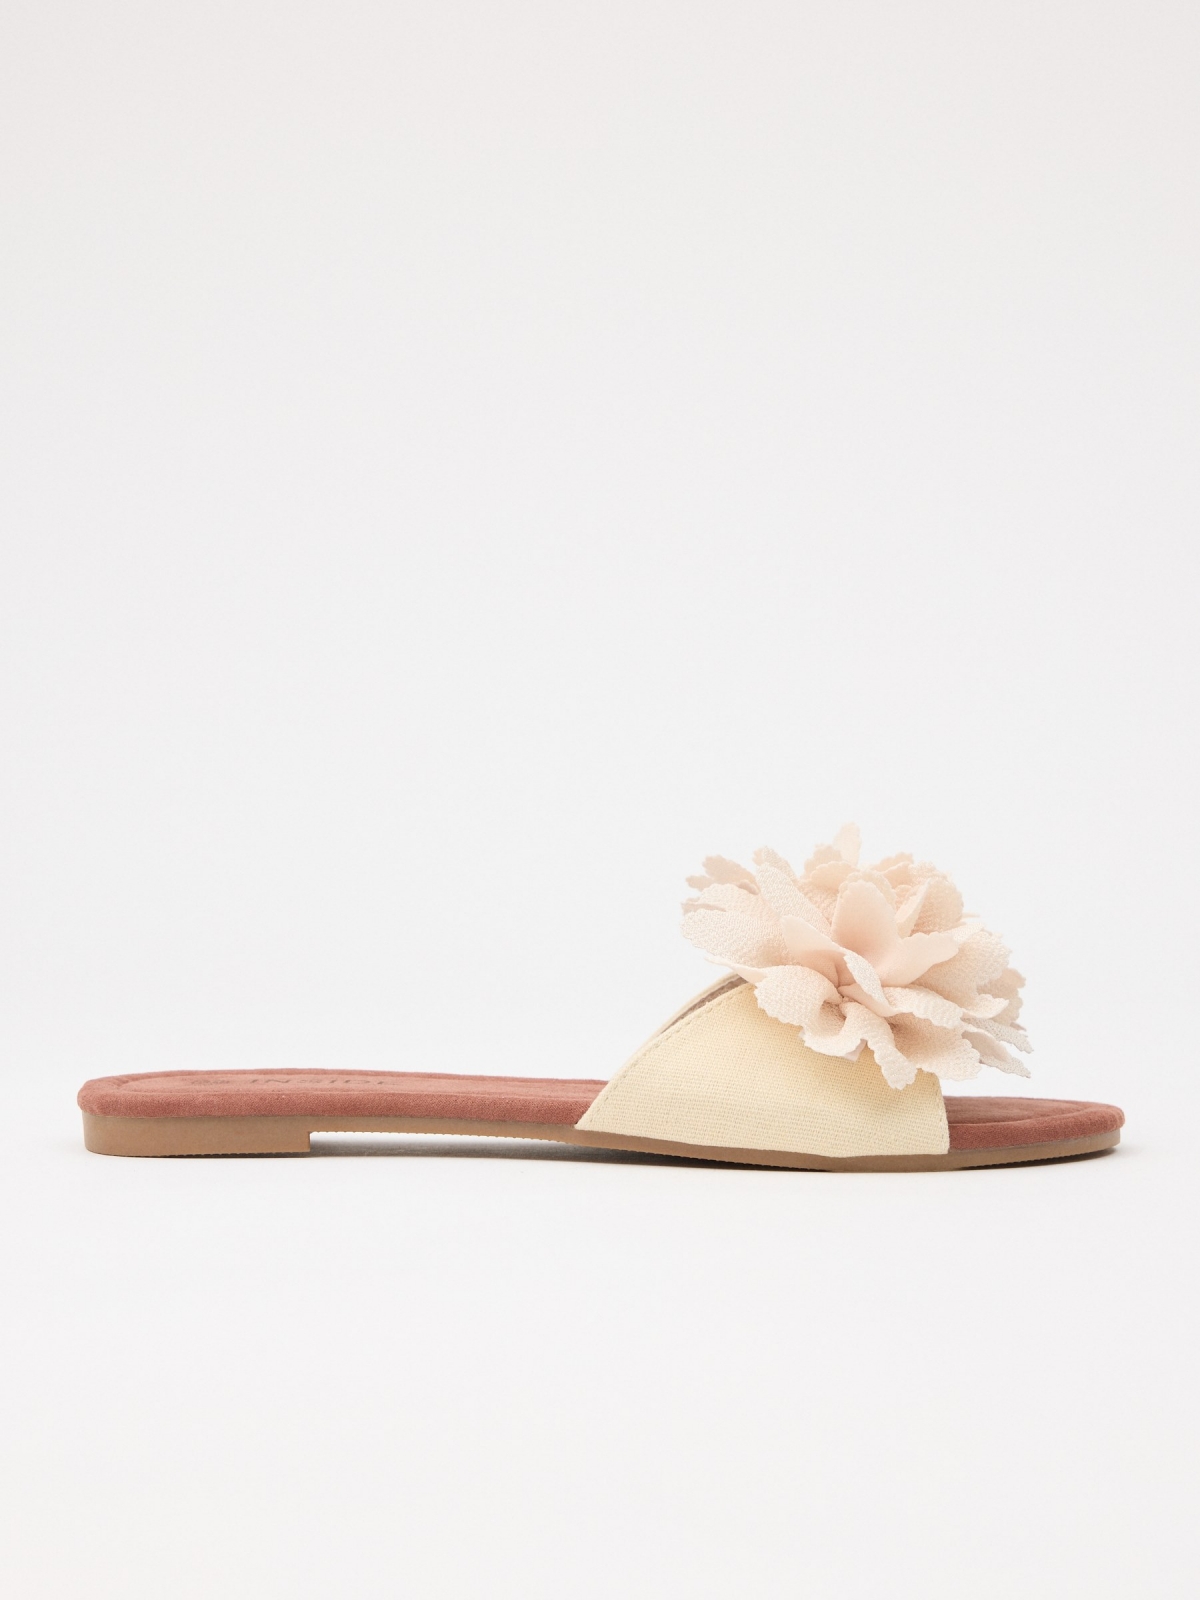 Floral sandal with flower off white